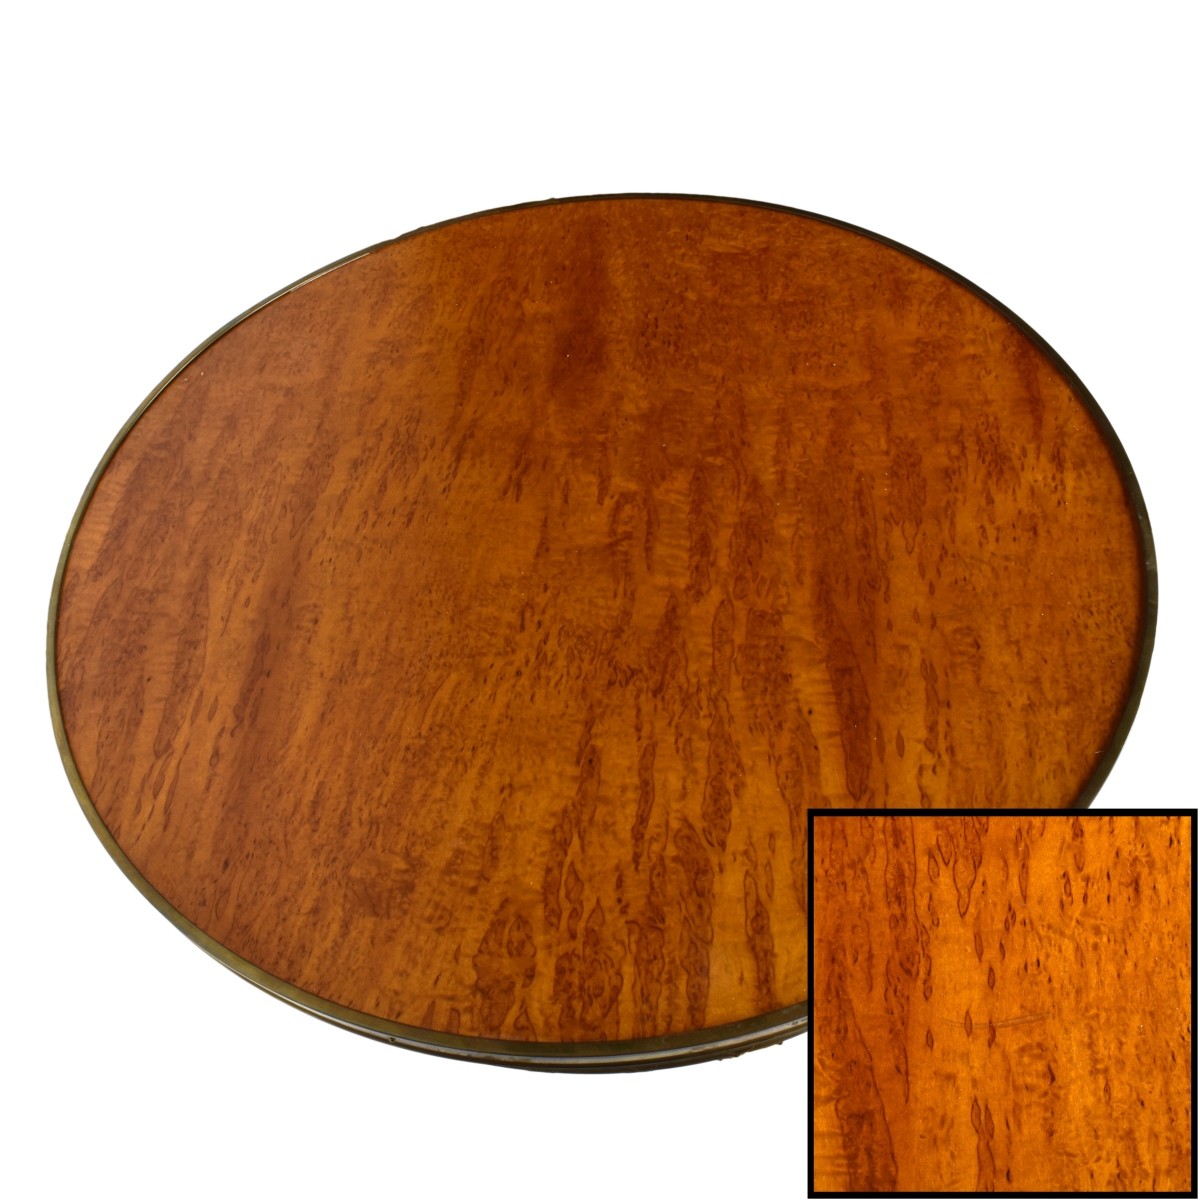 Empire Style Round Center Table